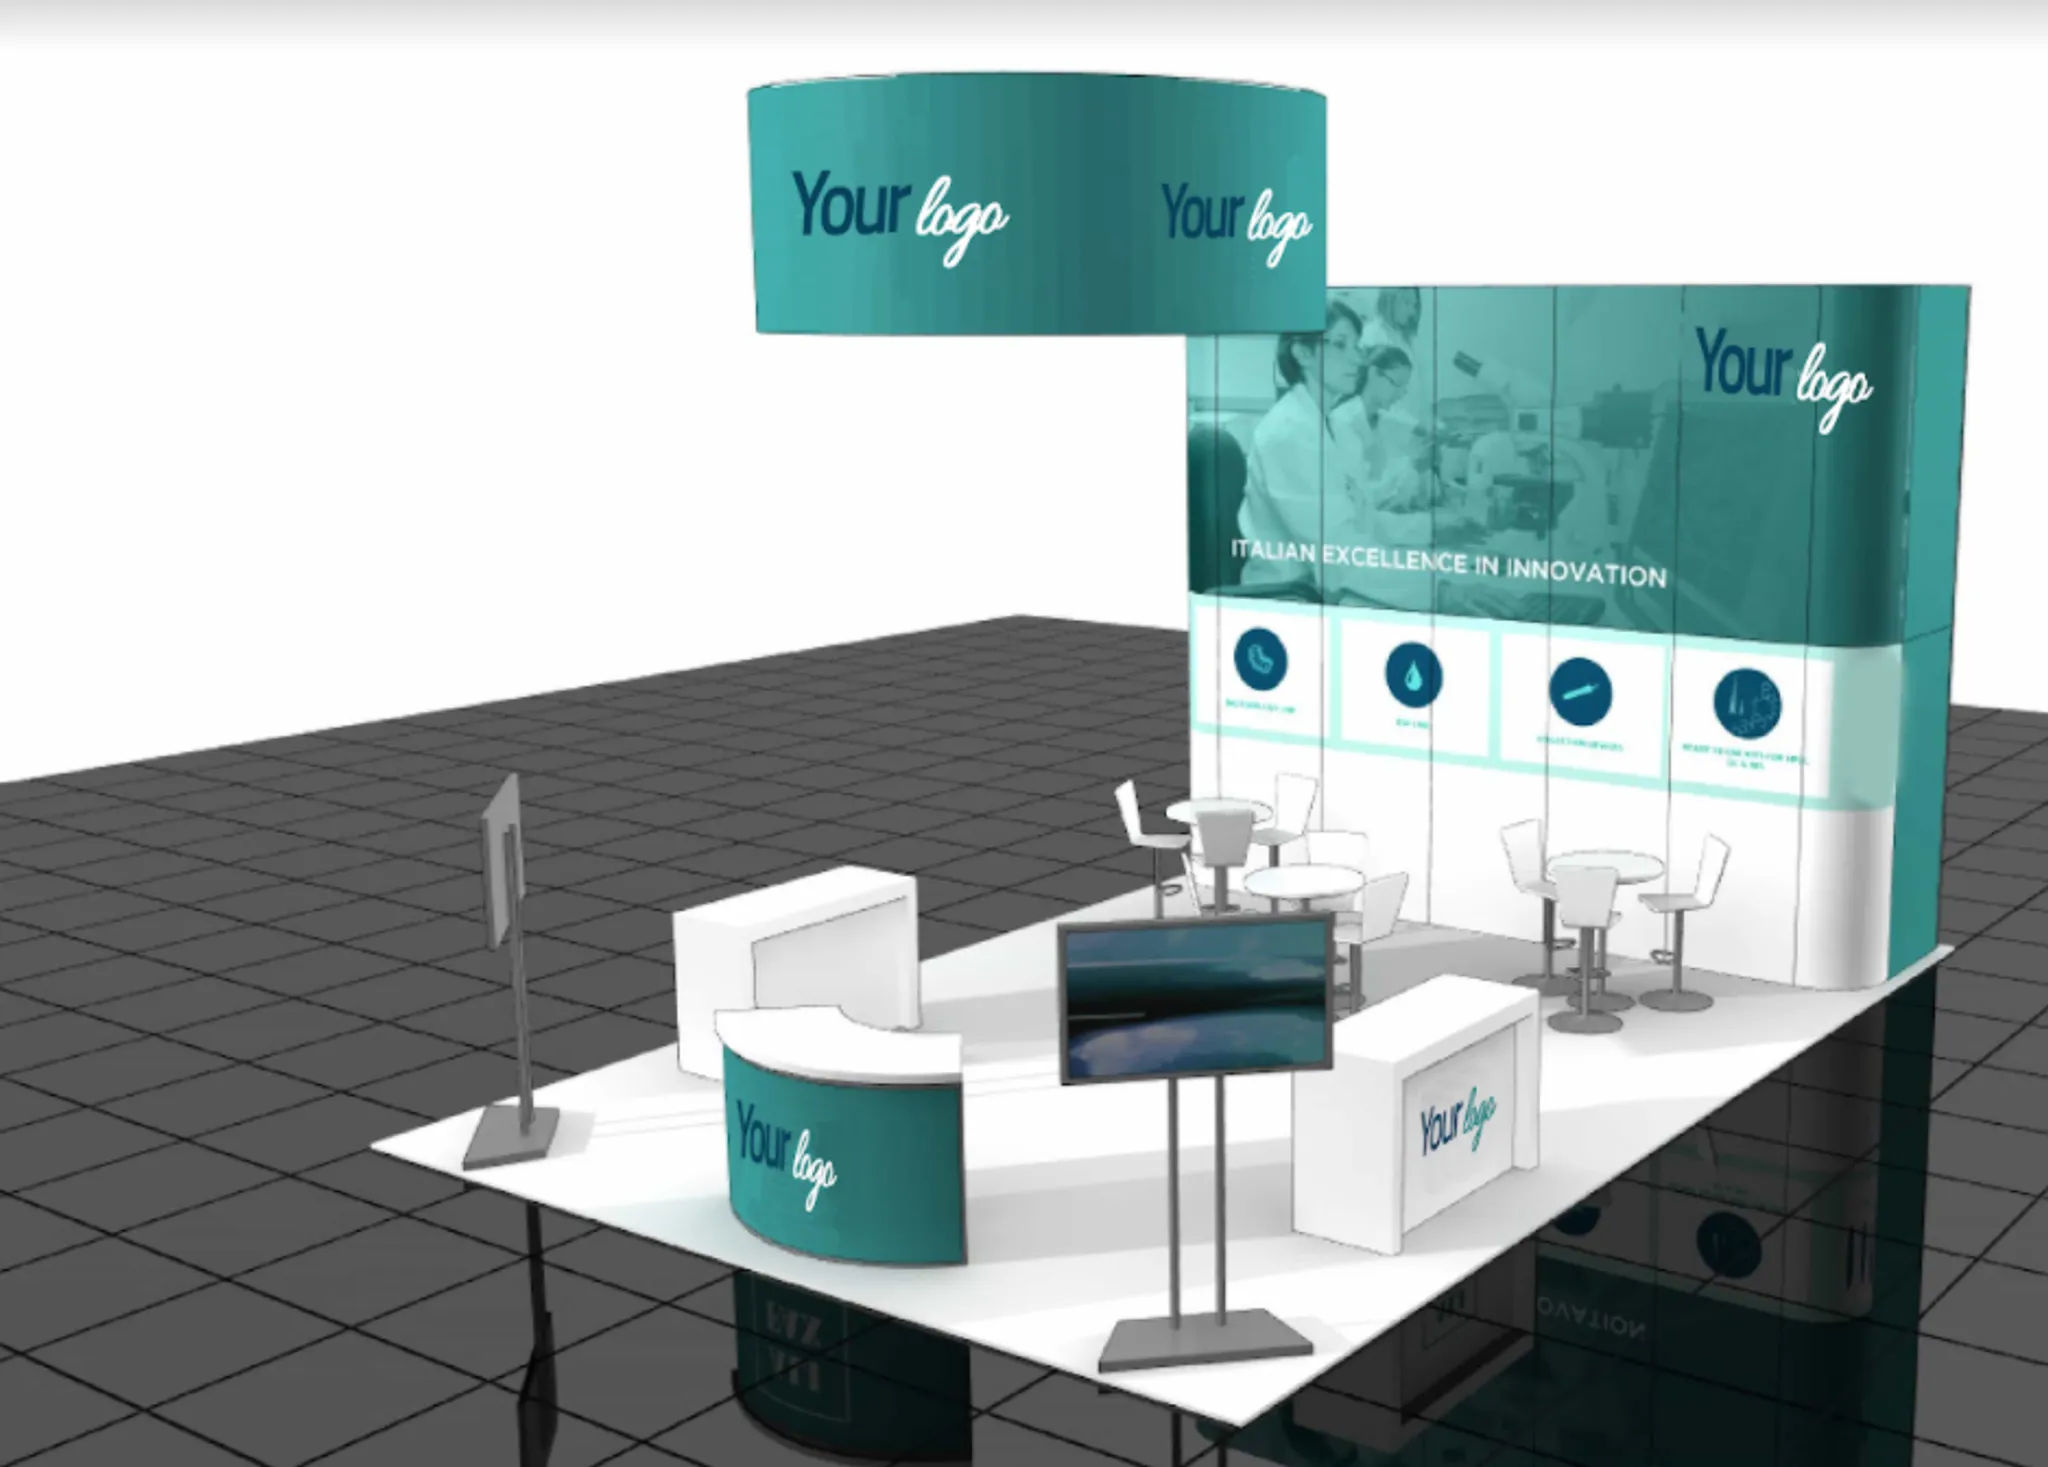 20x30 trade show booth